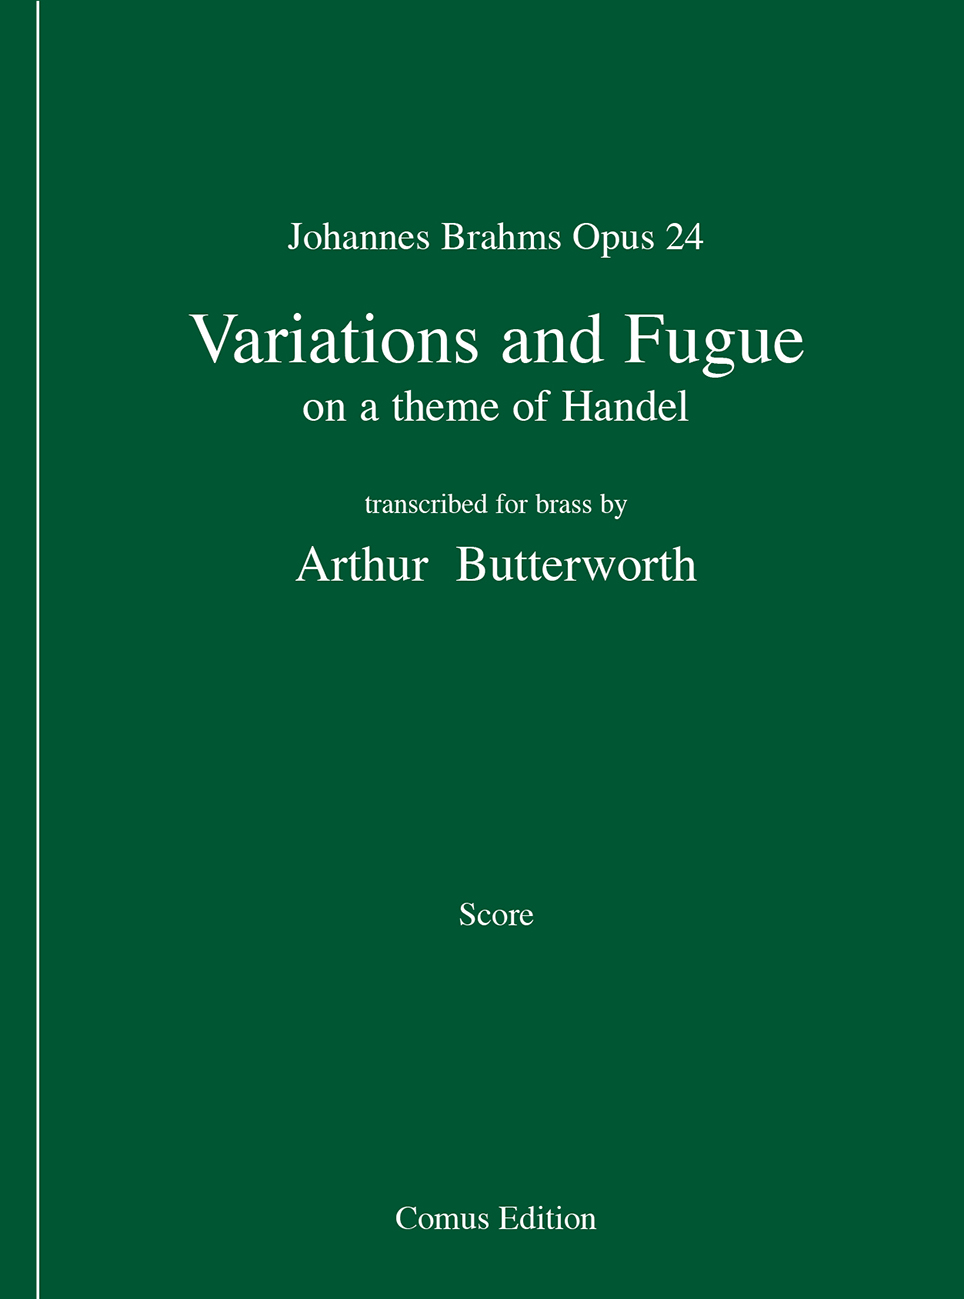 Outer cover of item Variations and Fugue on a theme of Handel, Op.24